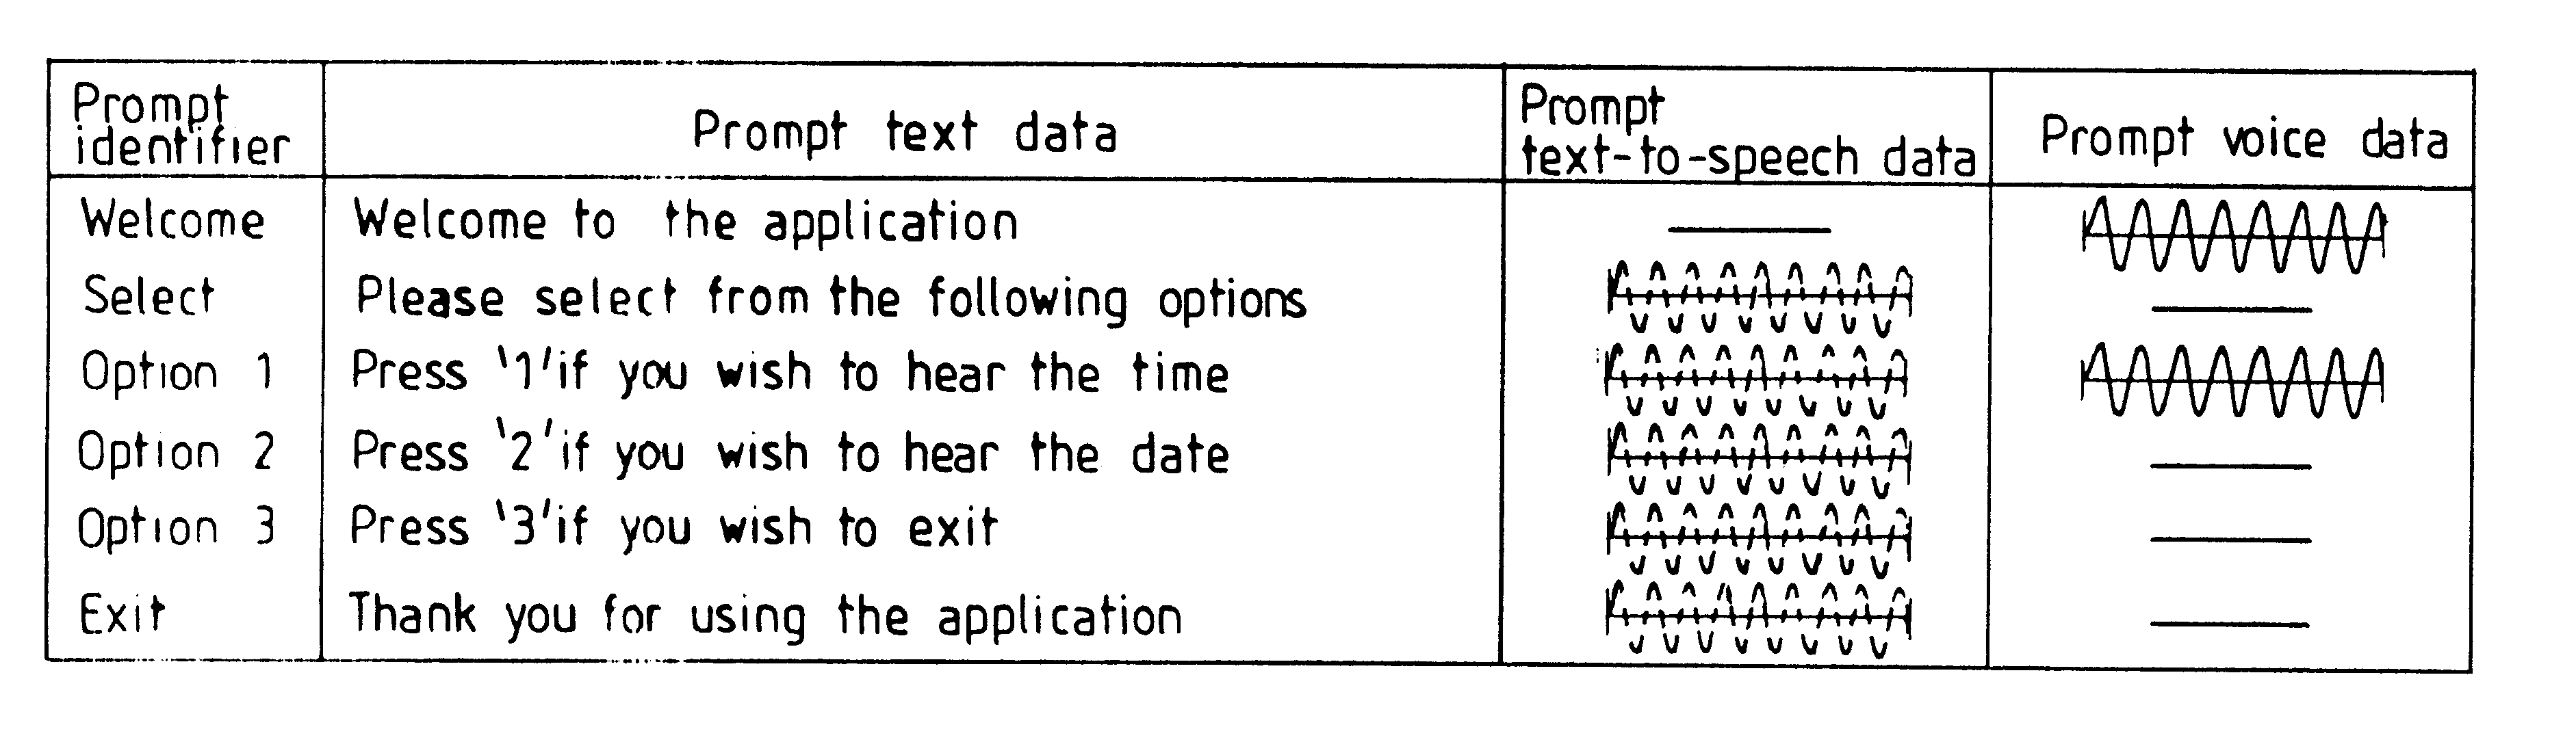 Developing voice response applications from pre-recorded voice and stored text-to-speech prompts